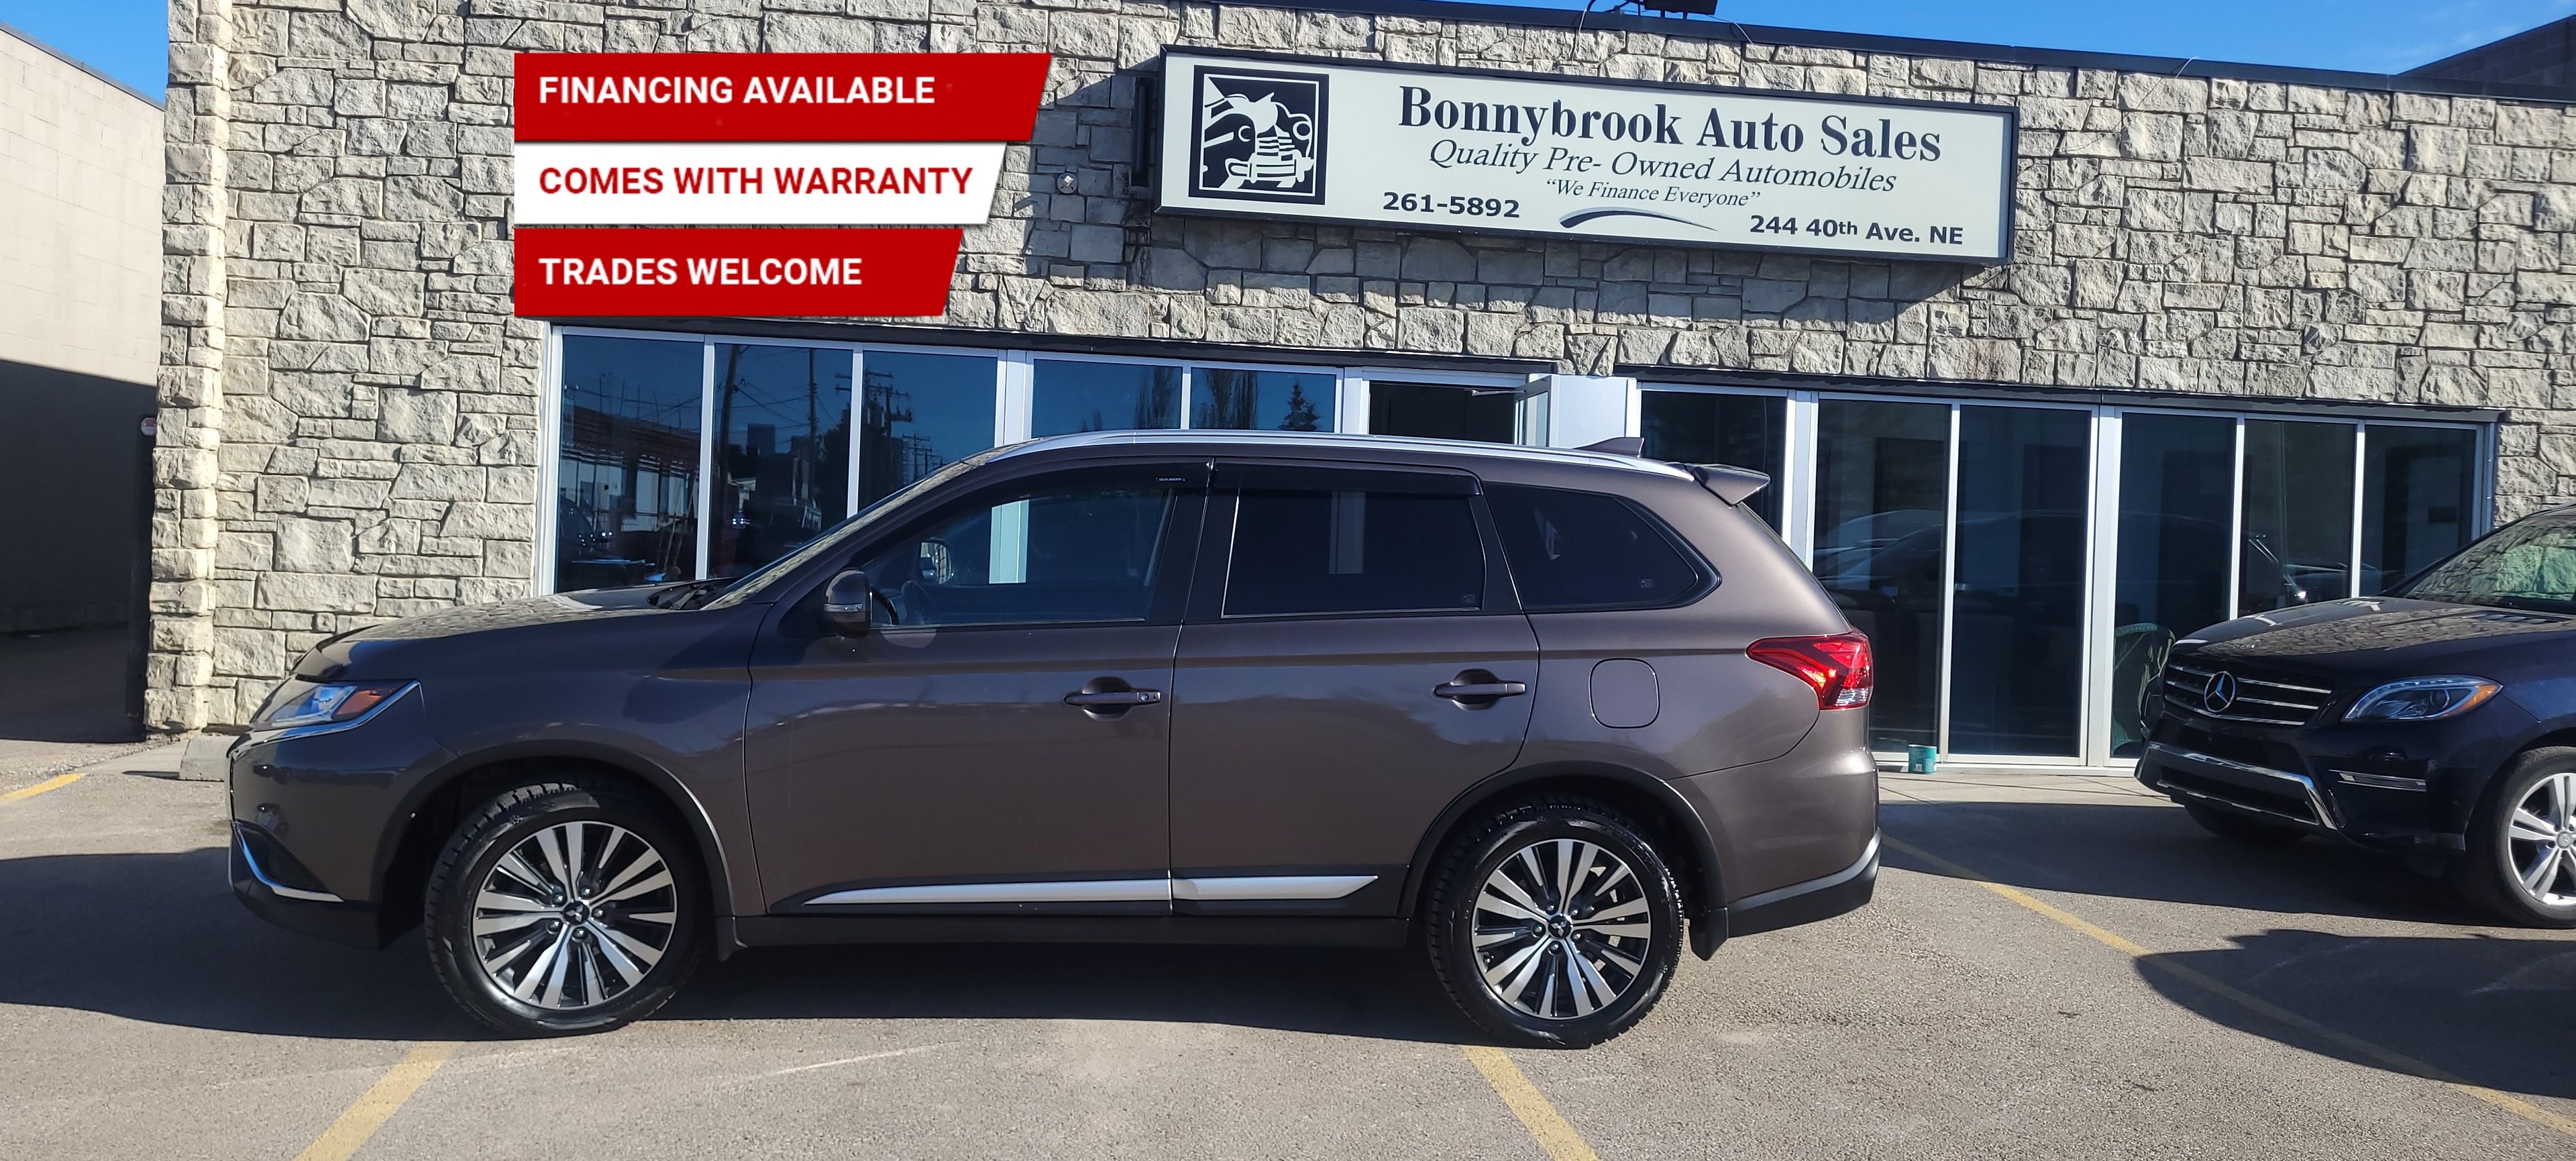 2020 Mitsubishi Outlander ES S-AWC/REARVIEW CAMERA/HEATED SEATS/SUNROOF